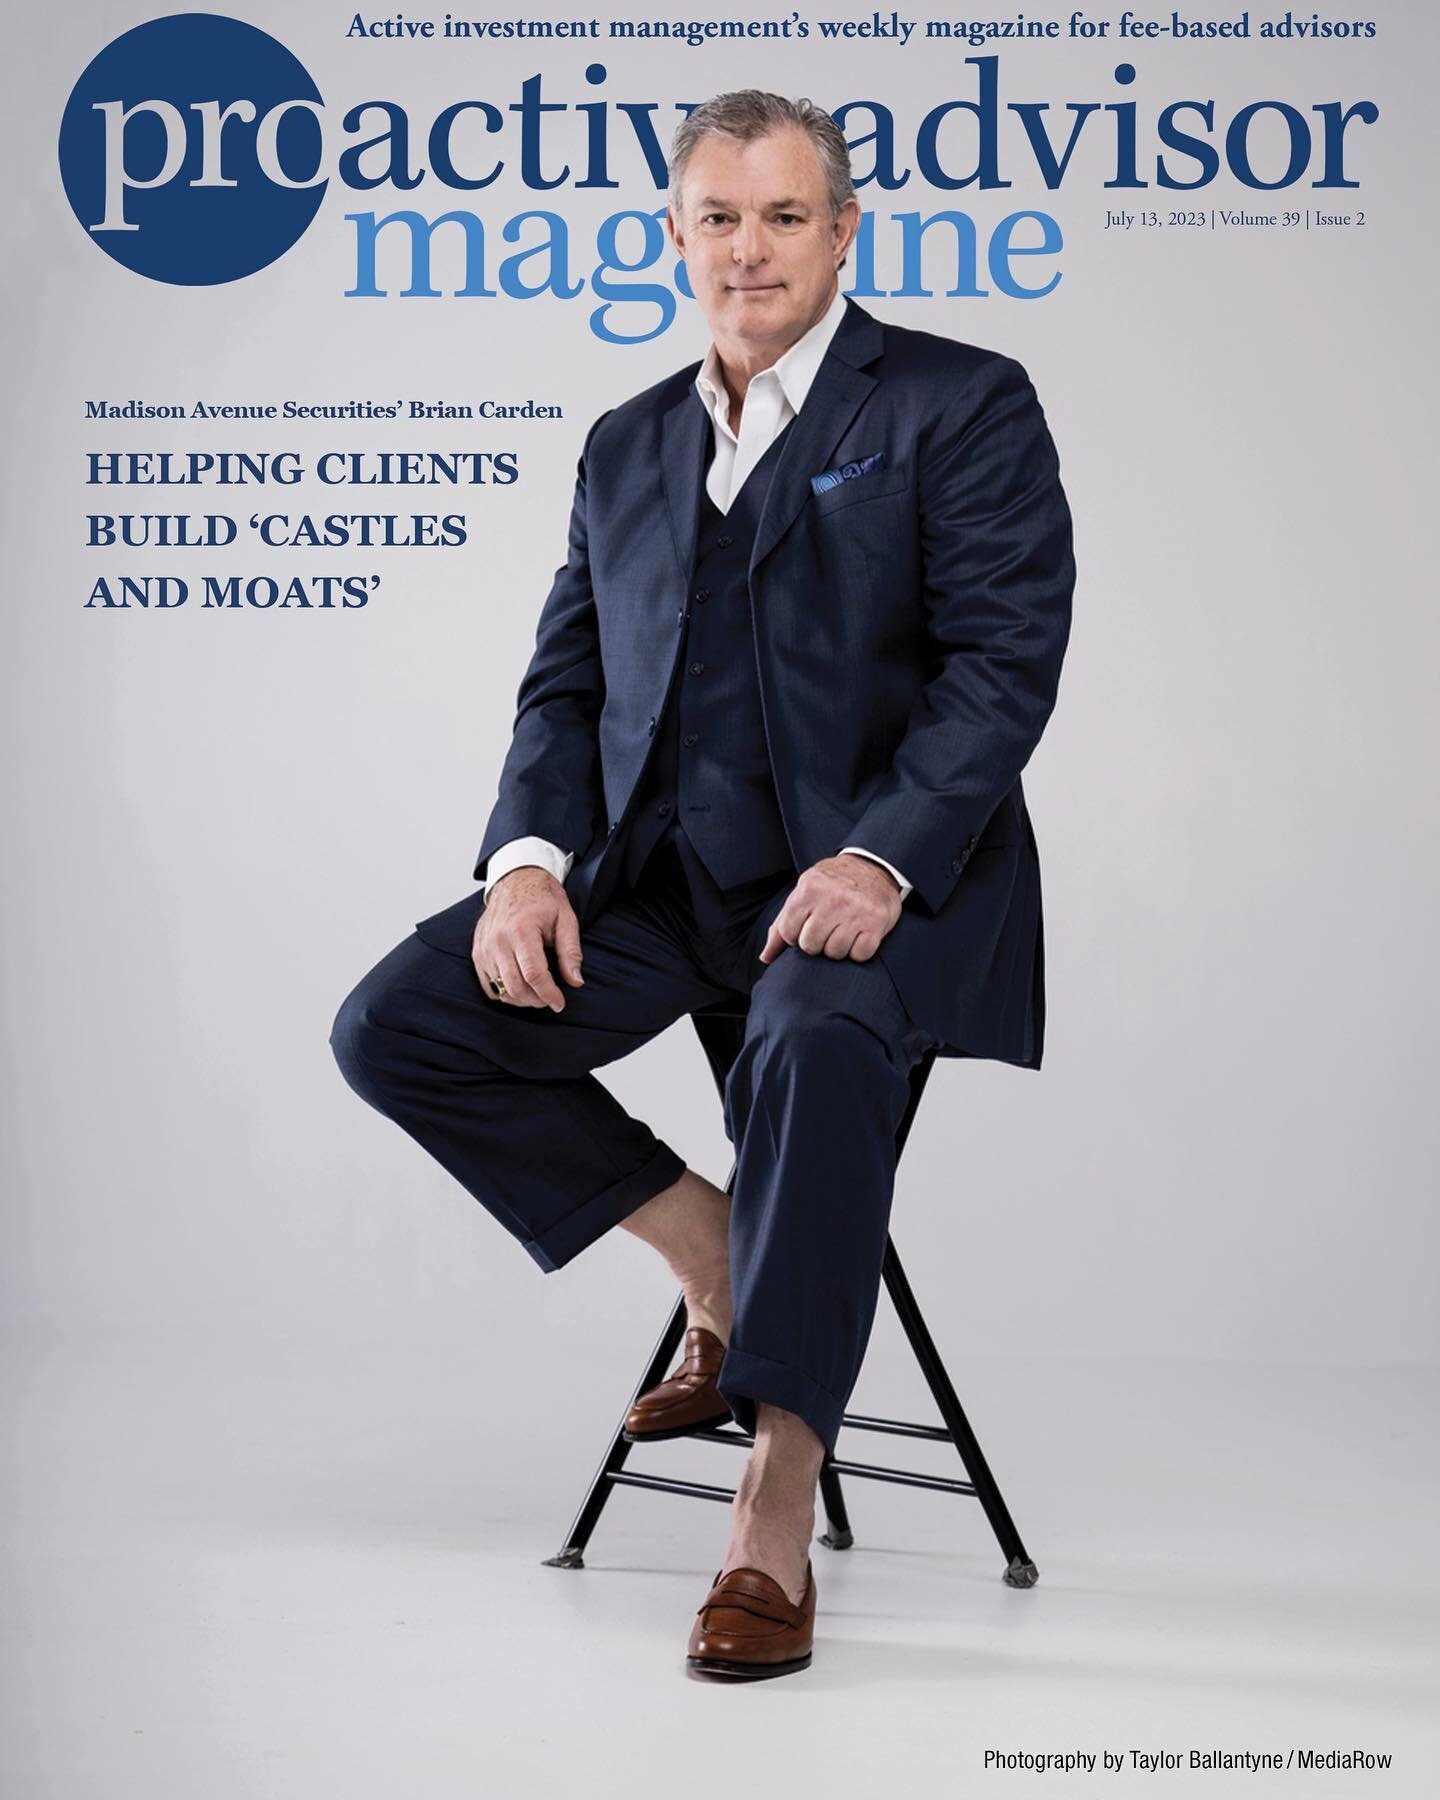 Author and Professional Explainer @carden_brian on the cover of Proactive Advisor Magazine 

Photo by @taylorbphoto / @mediarow